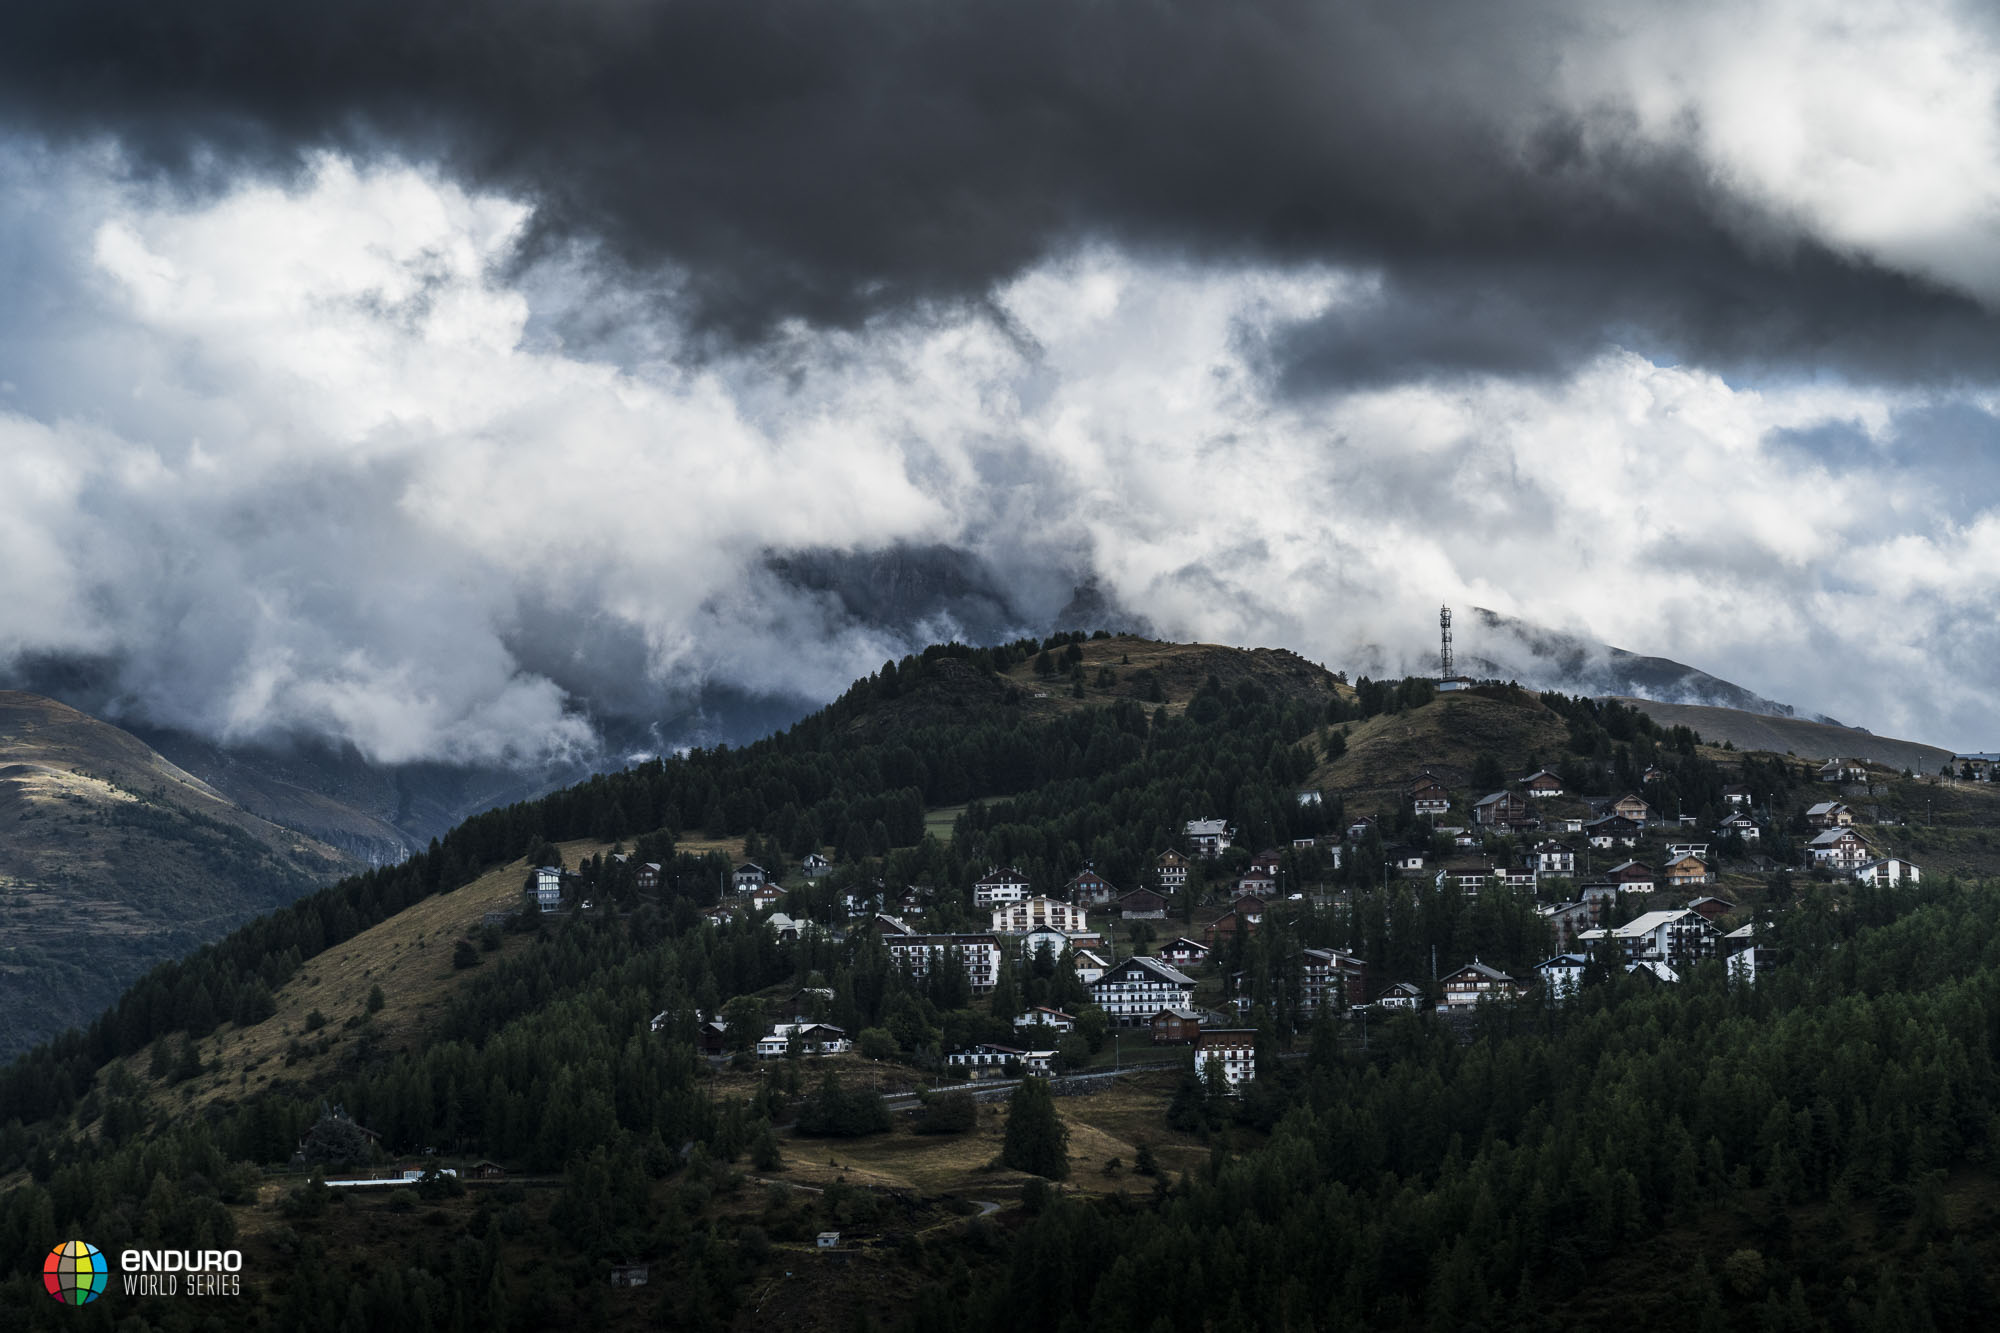 The view of Valberg was revealed after the cloud lifted from the storm the night before